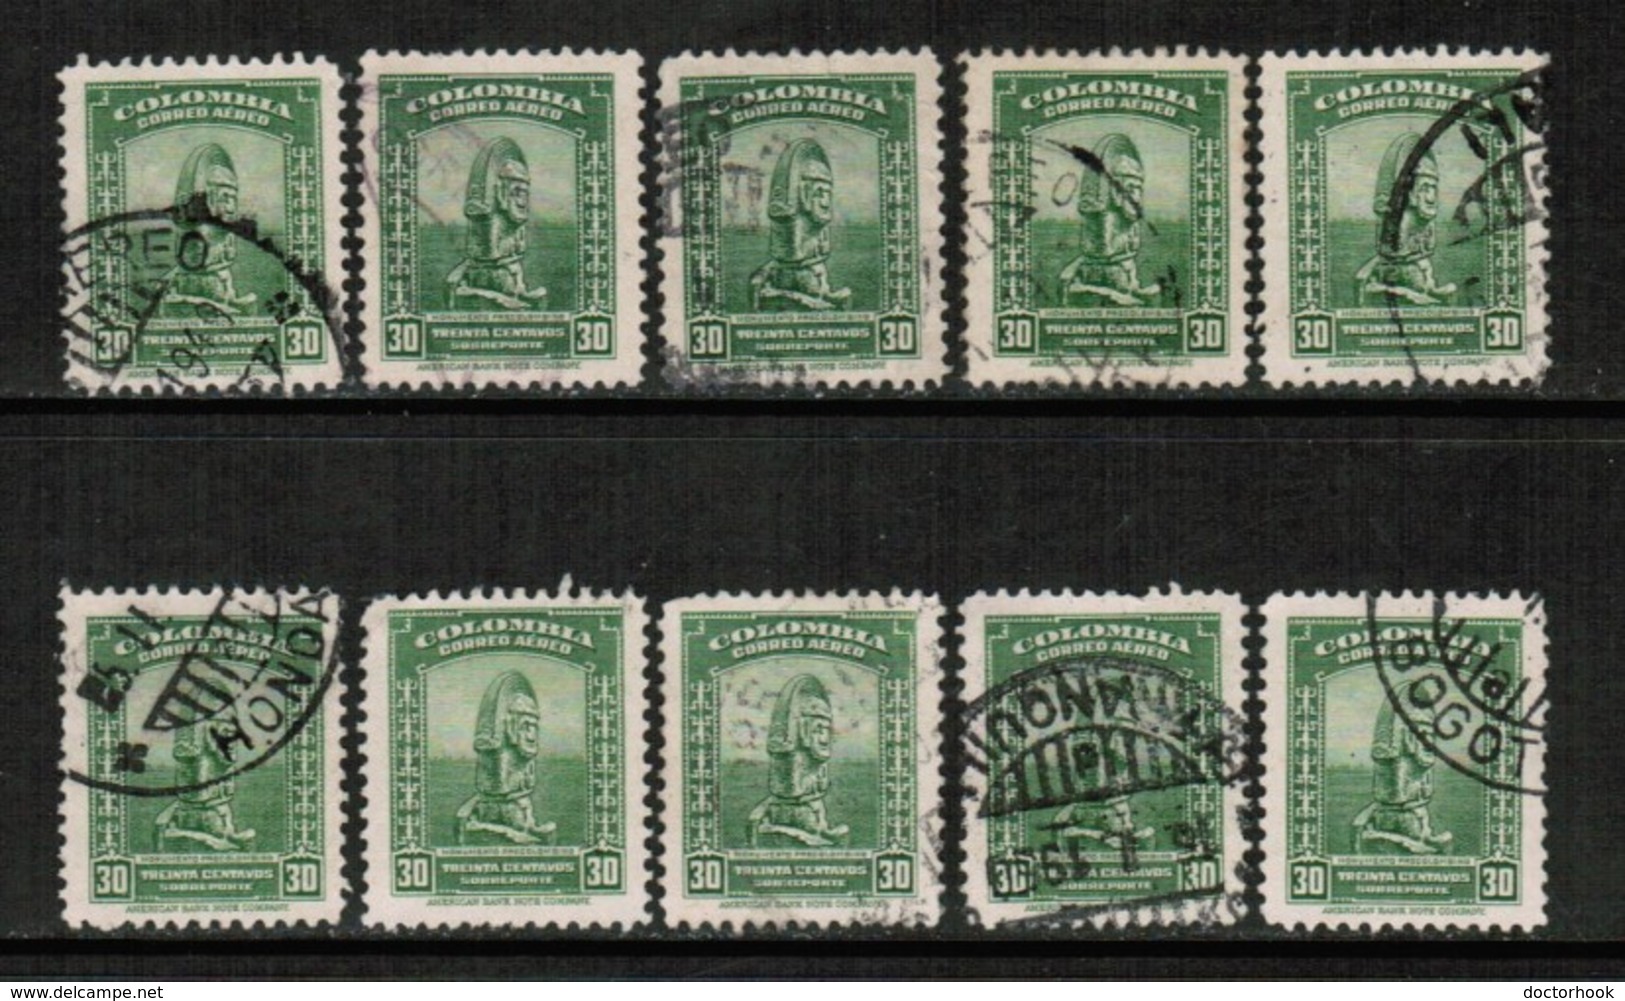 COLOMBIA   Scott # C 155 USED WHOLESALE LOT OF 10 (WH-198) - Vrac (max 999 Timbres)